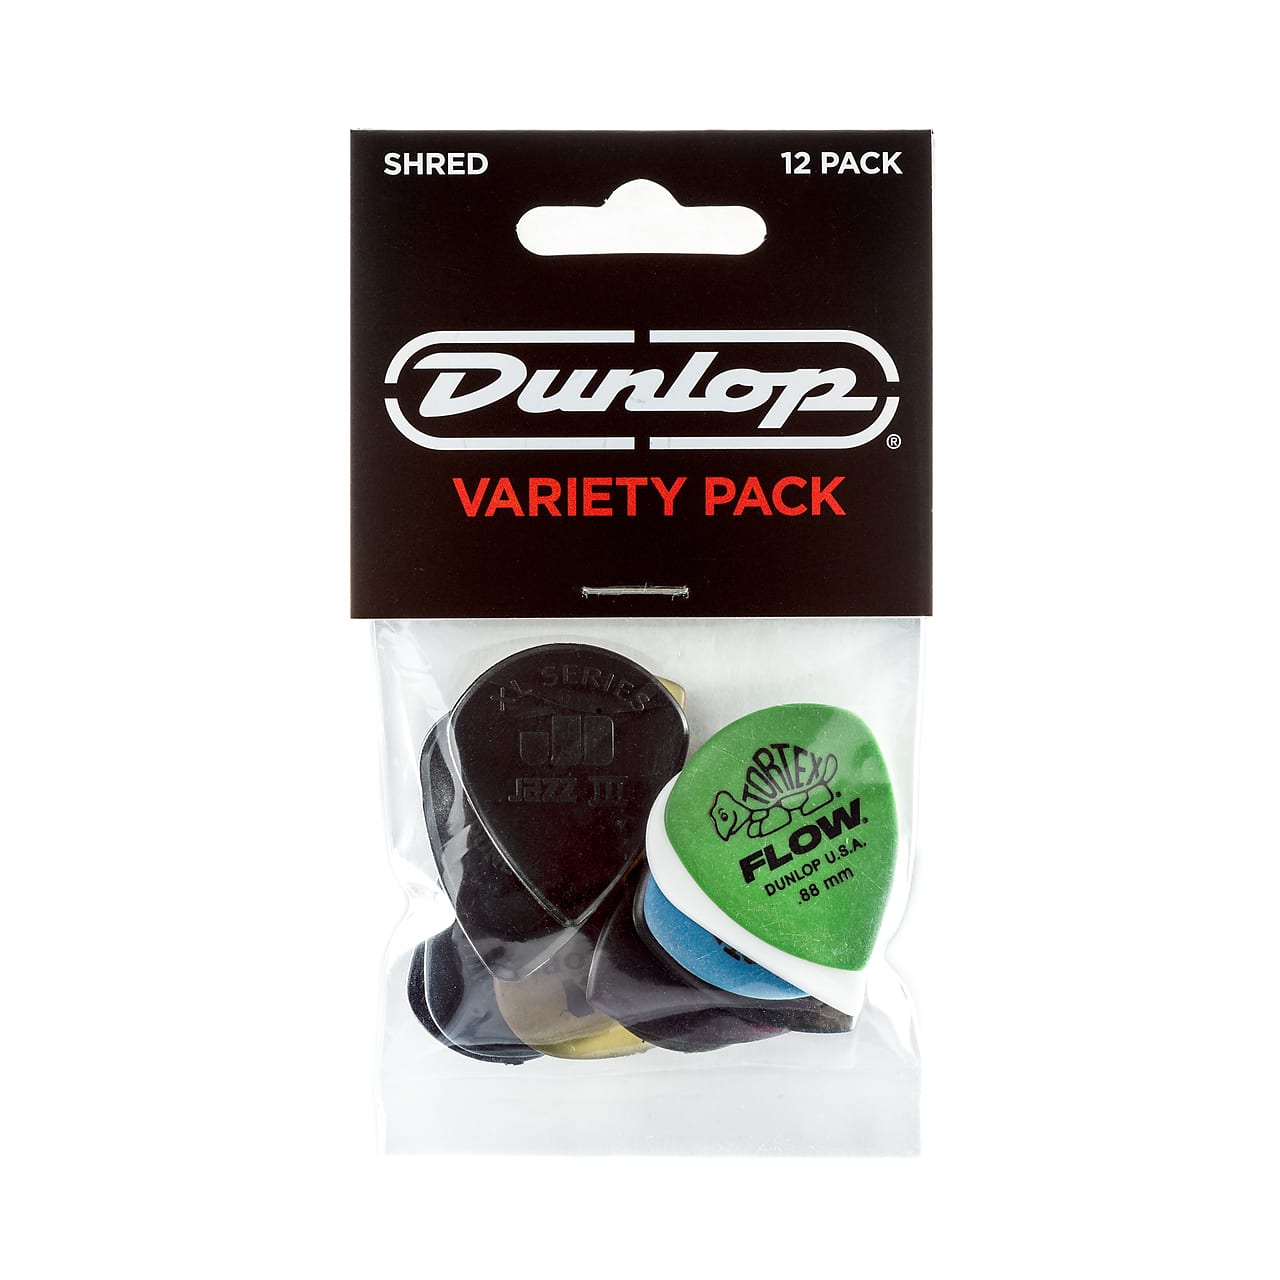 Dunlop PVP118 Shred Pick Variety Pack (12-Pack)